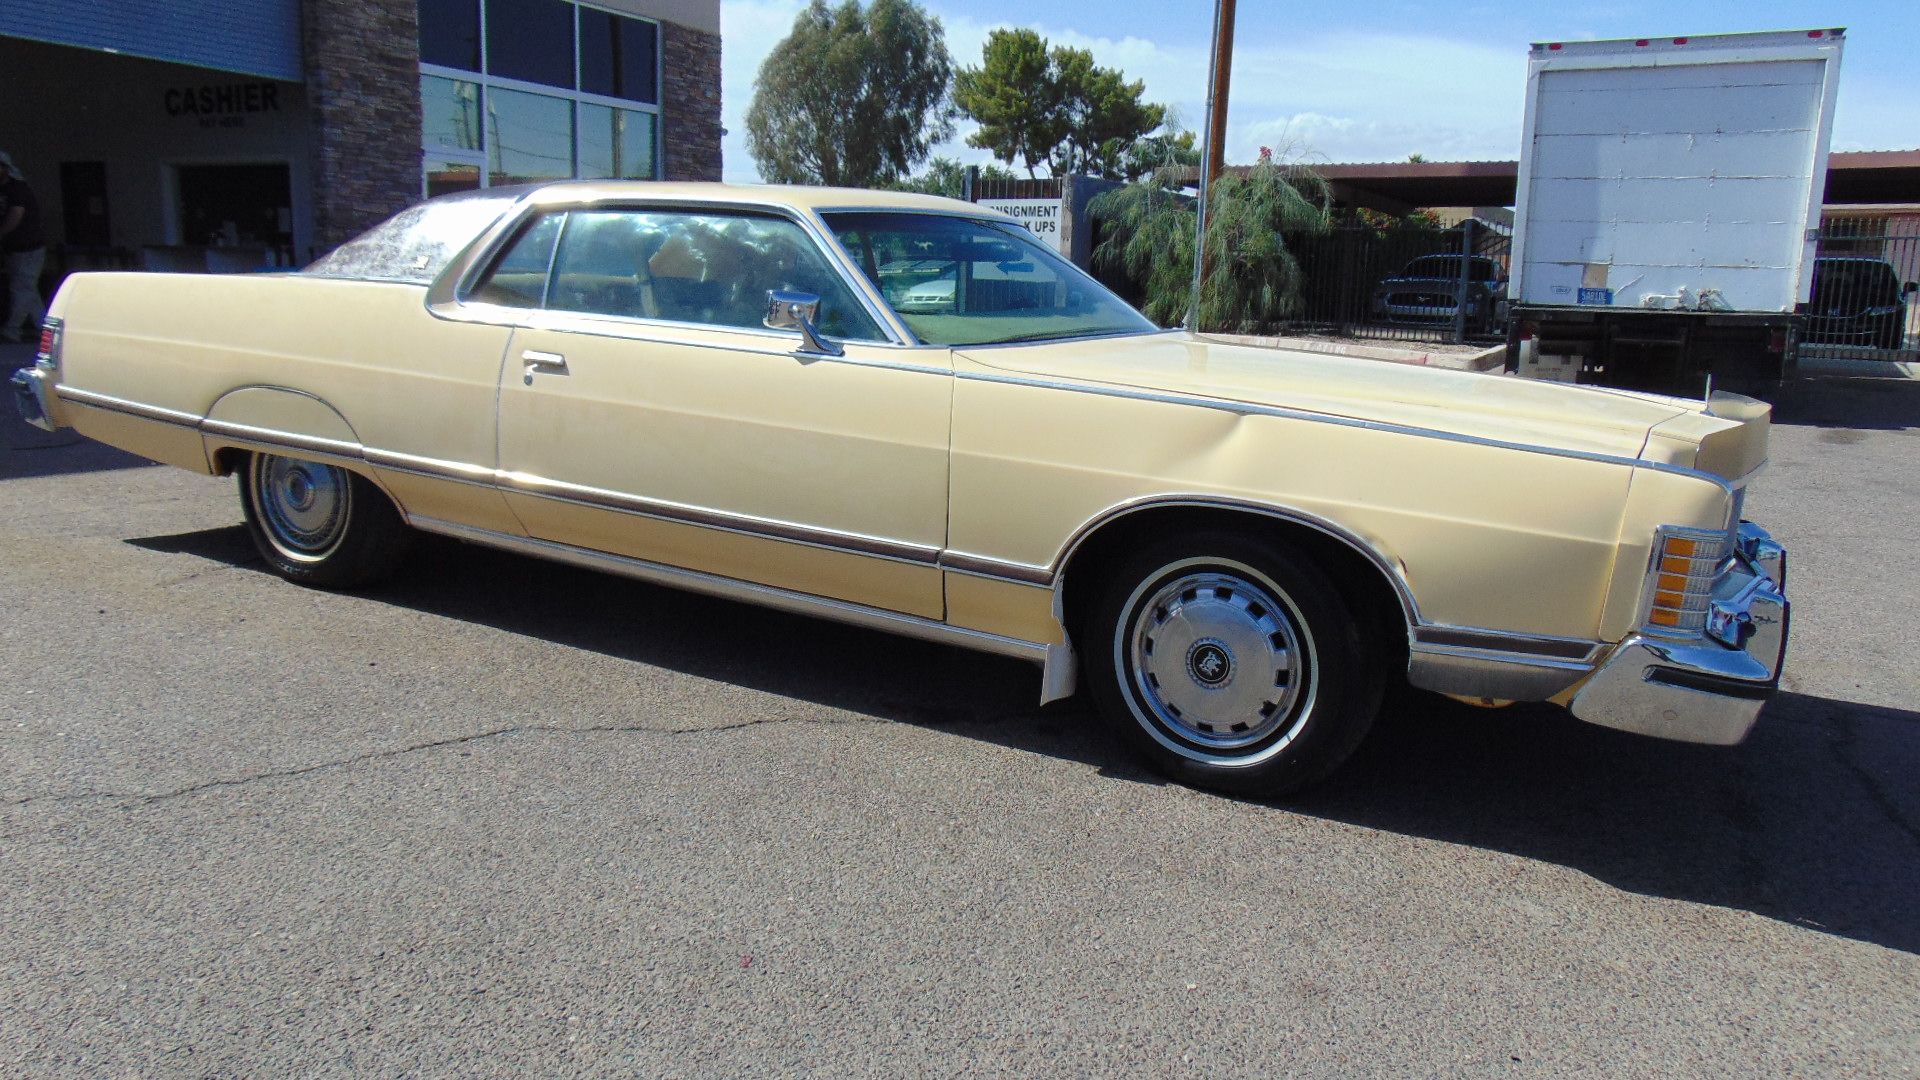 1978 MERCURY GRAND MARQUIS, ODOMETER READING 12,838, VIN. 8Z65S644505, 351M GAS, AUTO TRANS, FWD, CR - Image 7 of 13